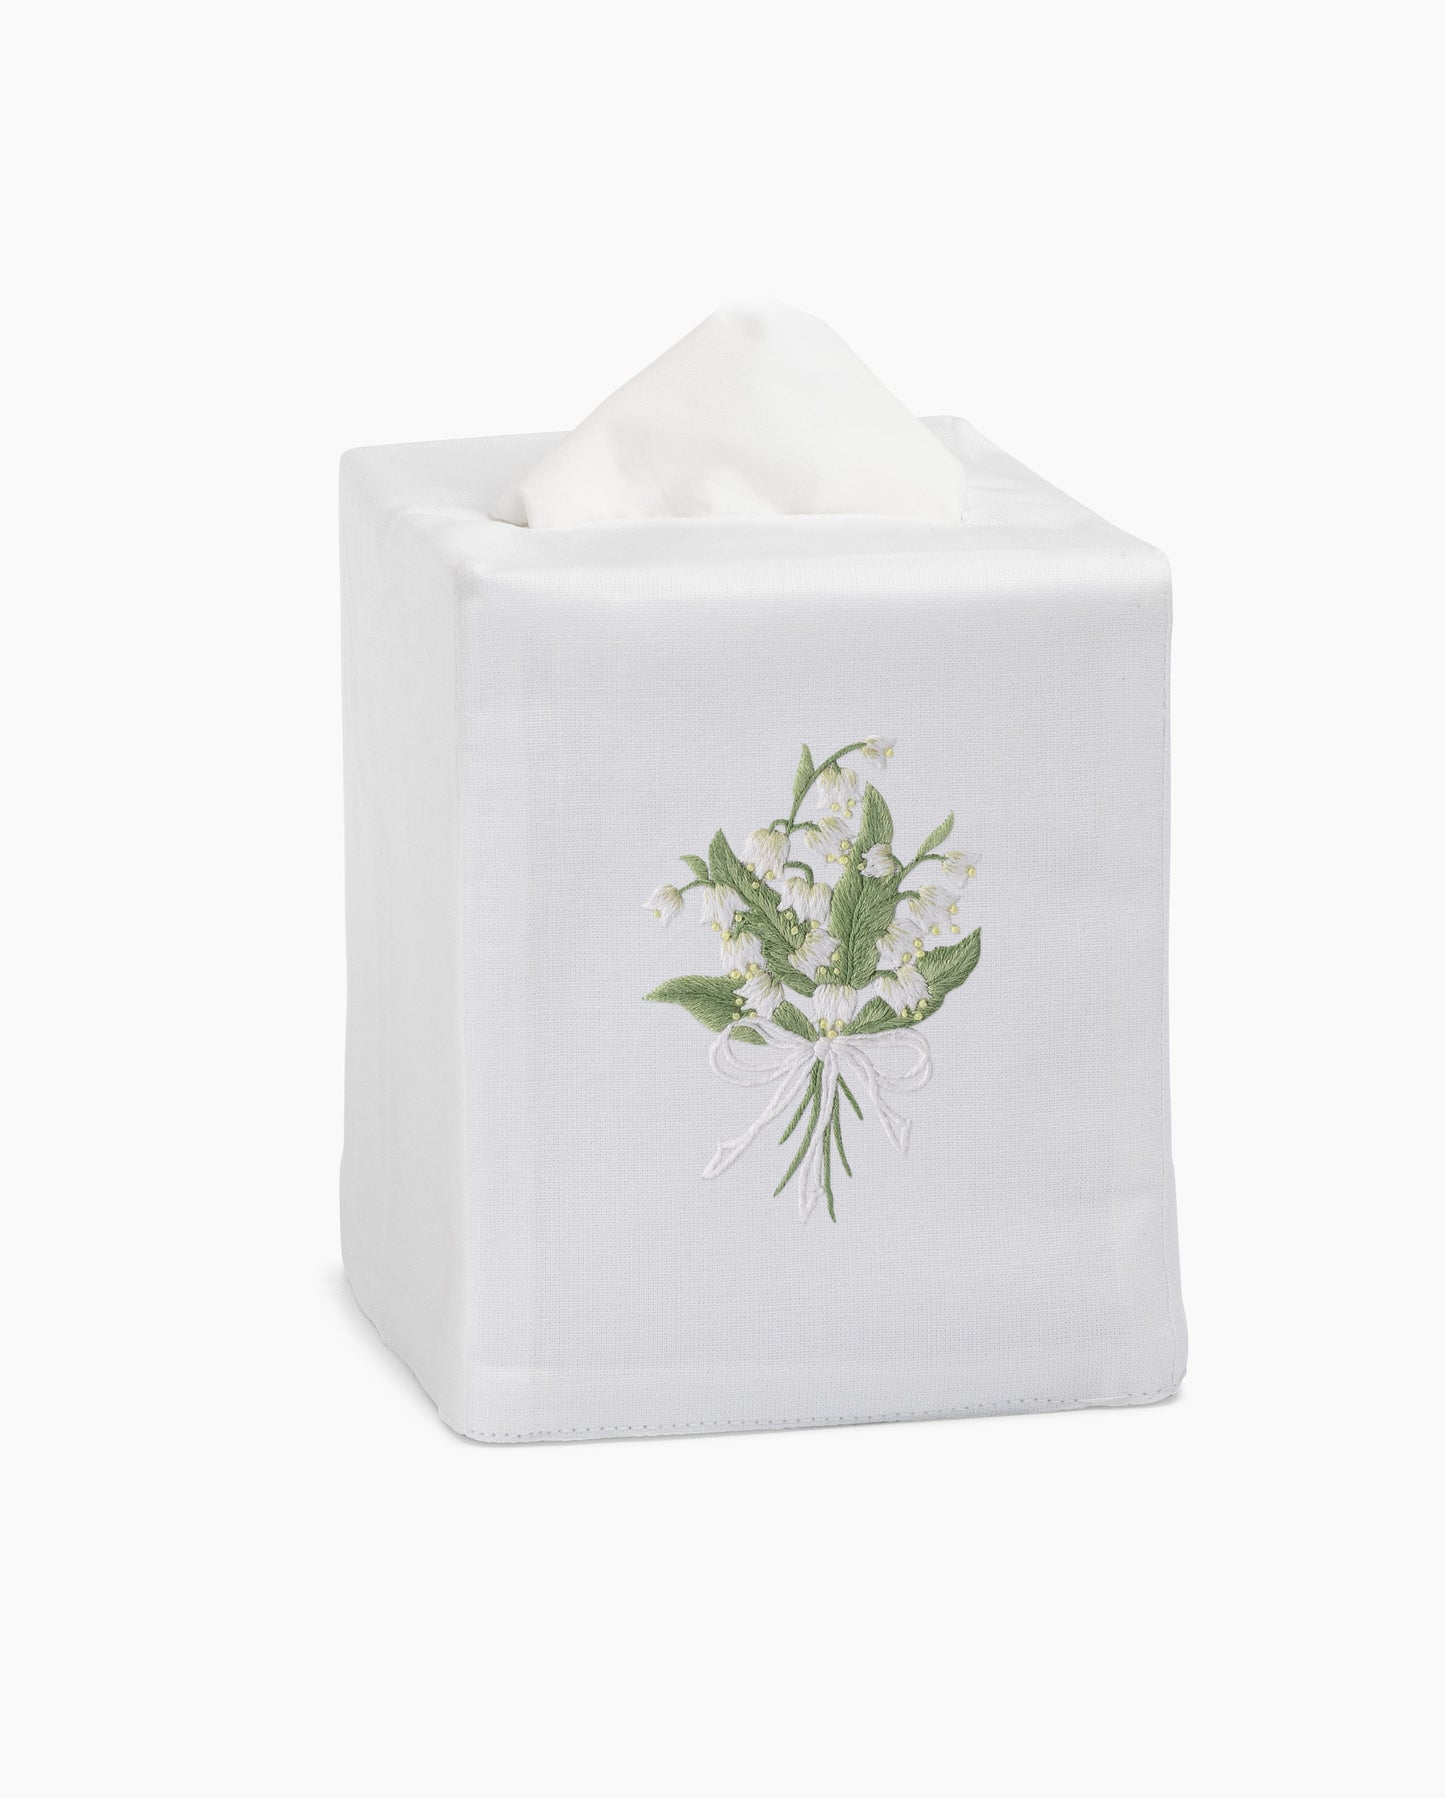 Lily of the Valley Tissue Box Cover